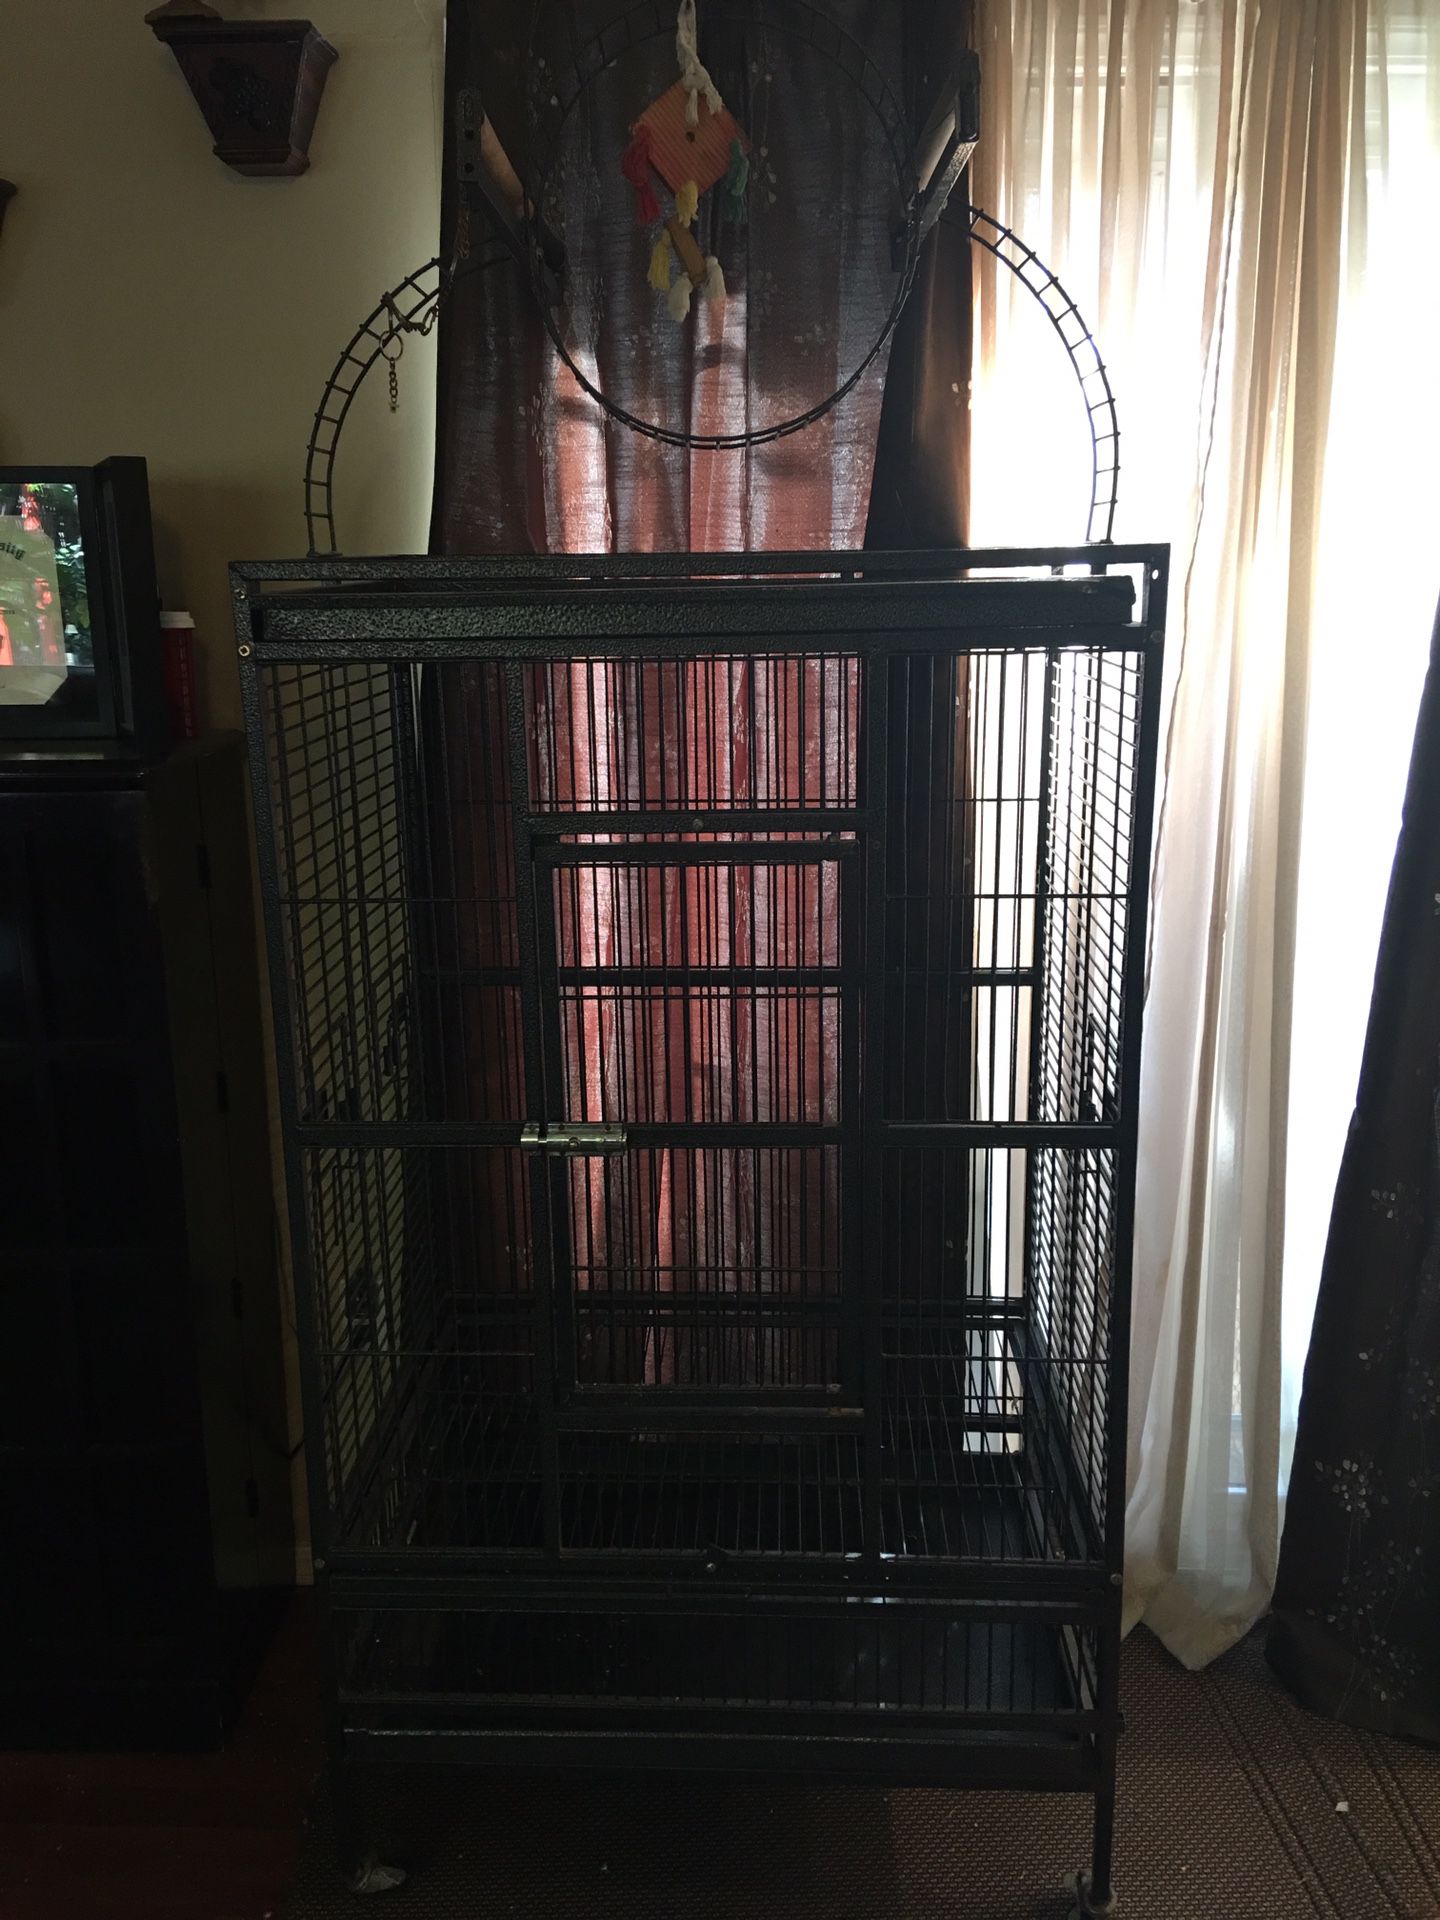 Large bird cage for parrot or other large bird